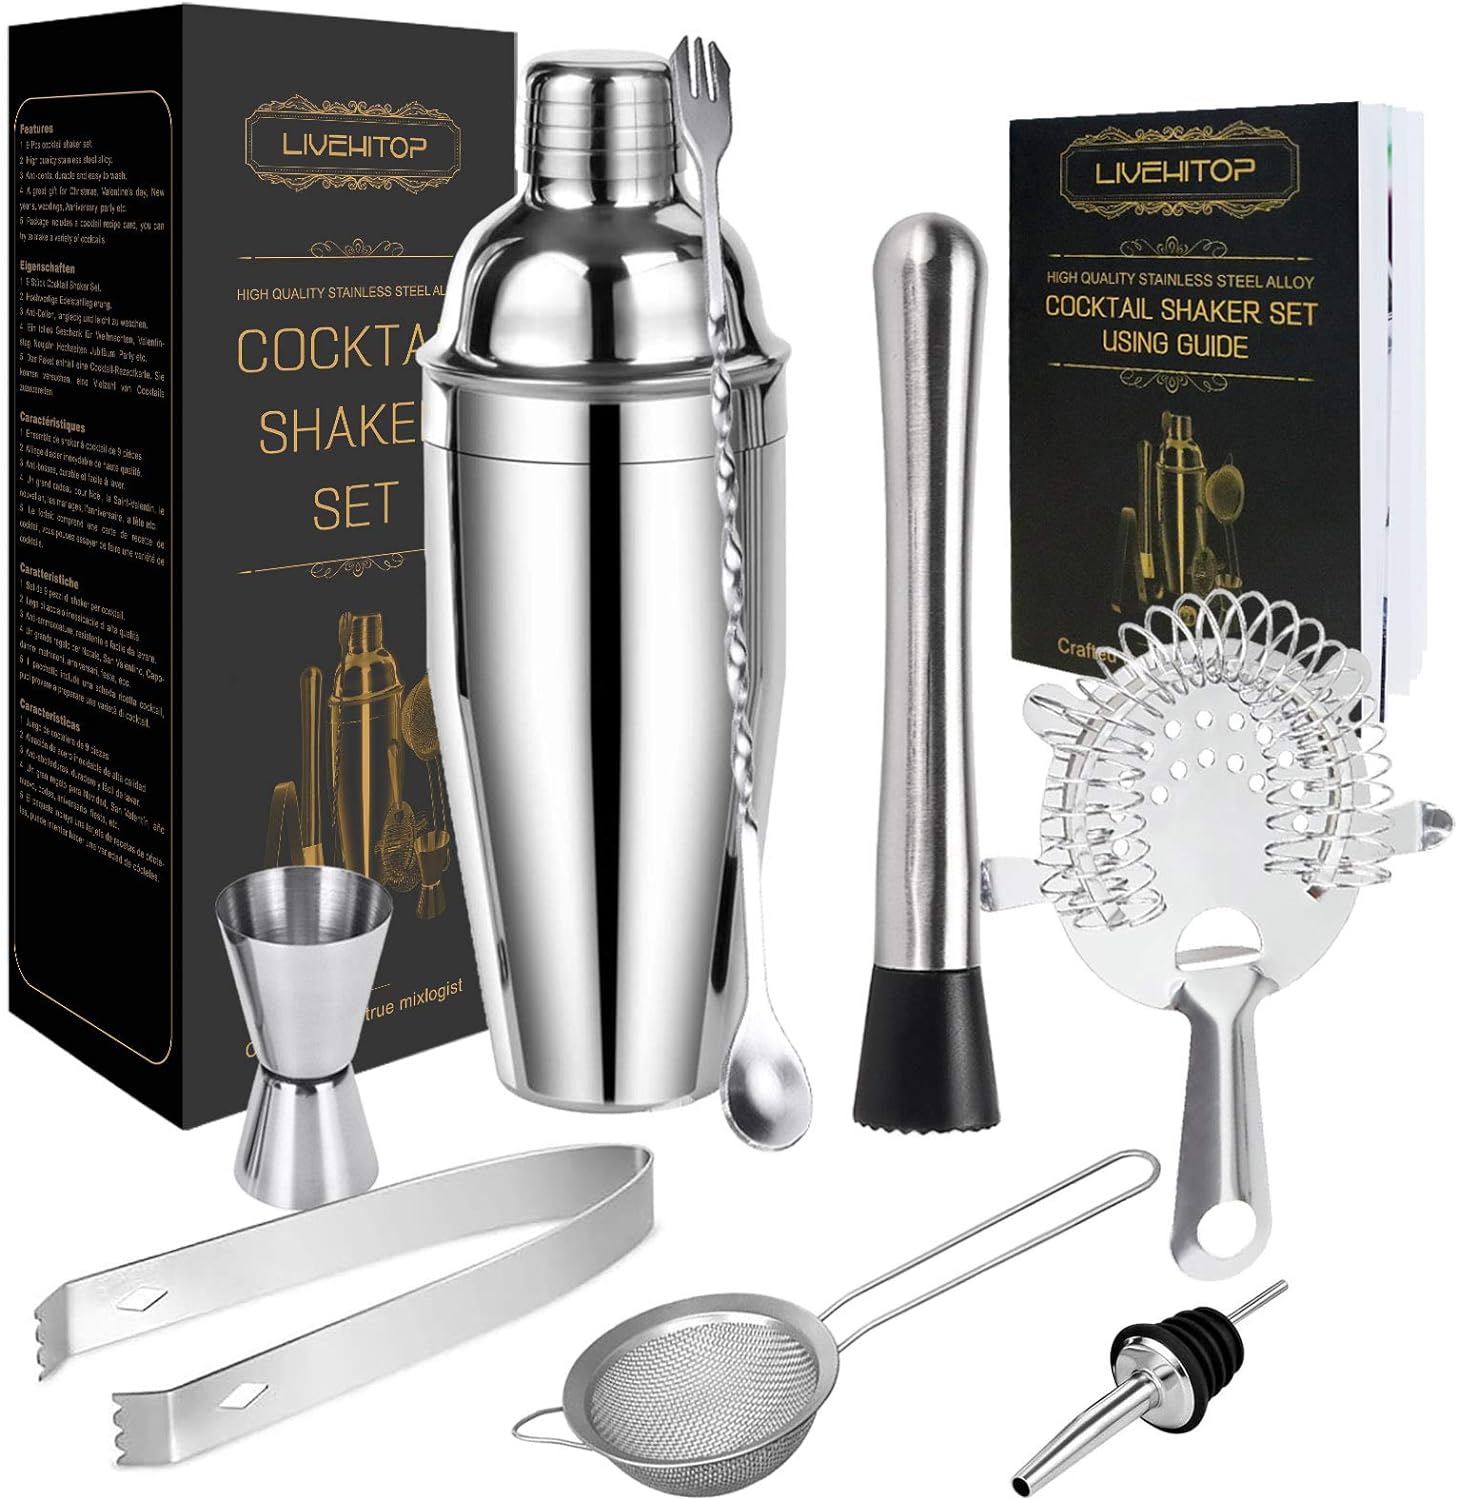 LIVEHITOP Cocktail Making Set, 9Pcs Stainless Steel Bartender Kit Professional Cocktail Shaker Set with 750ML Boston Shaker for Home, Bar, Party